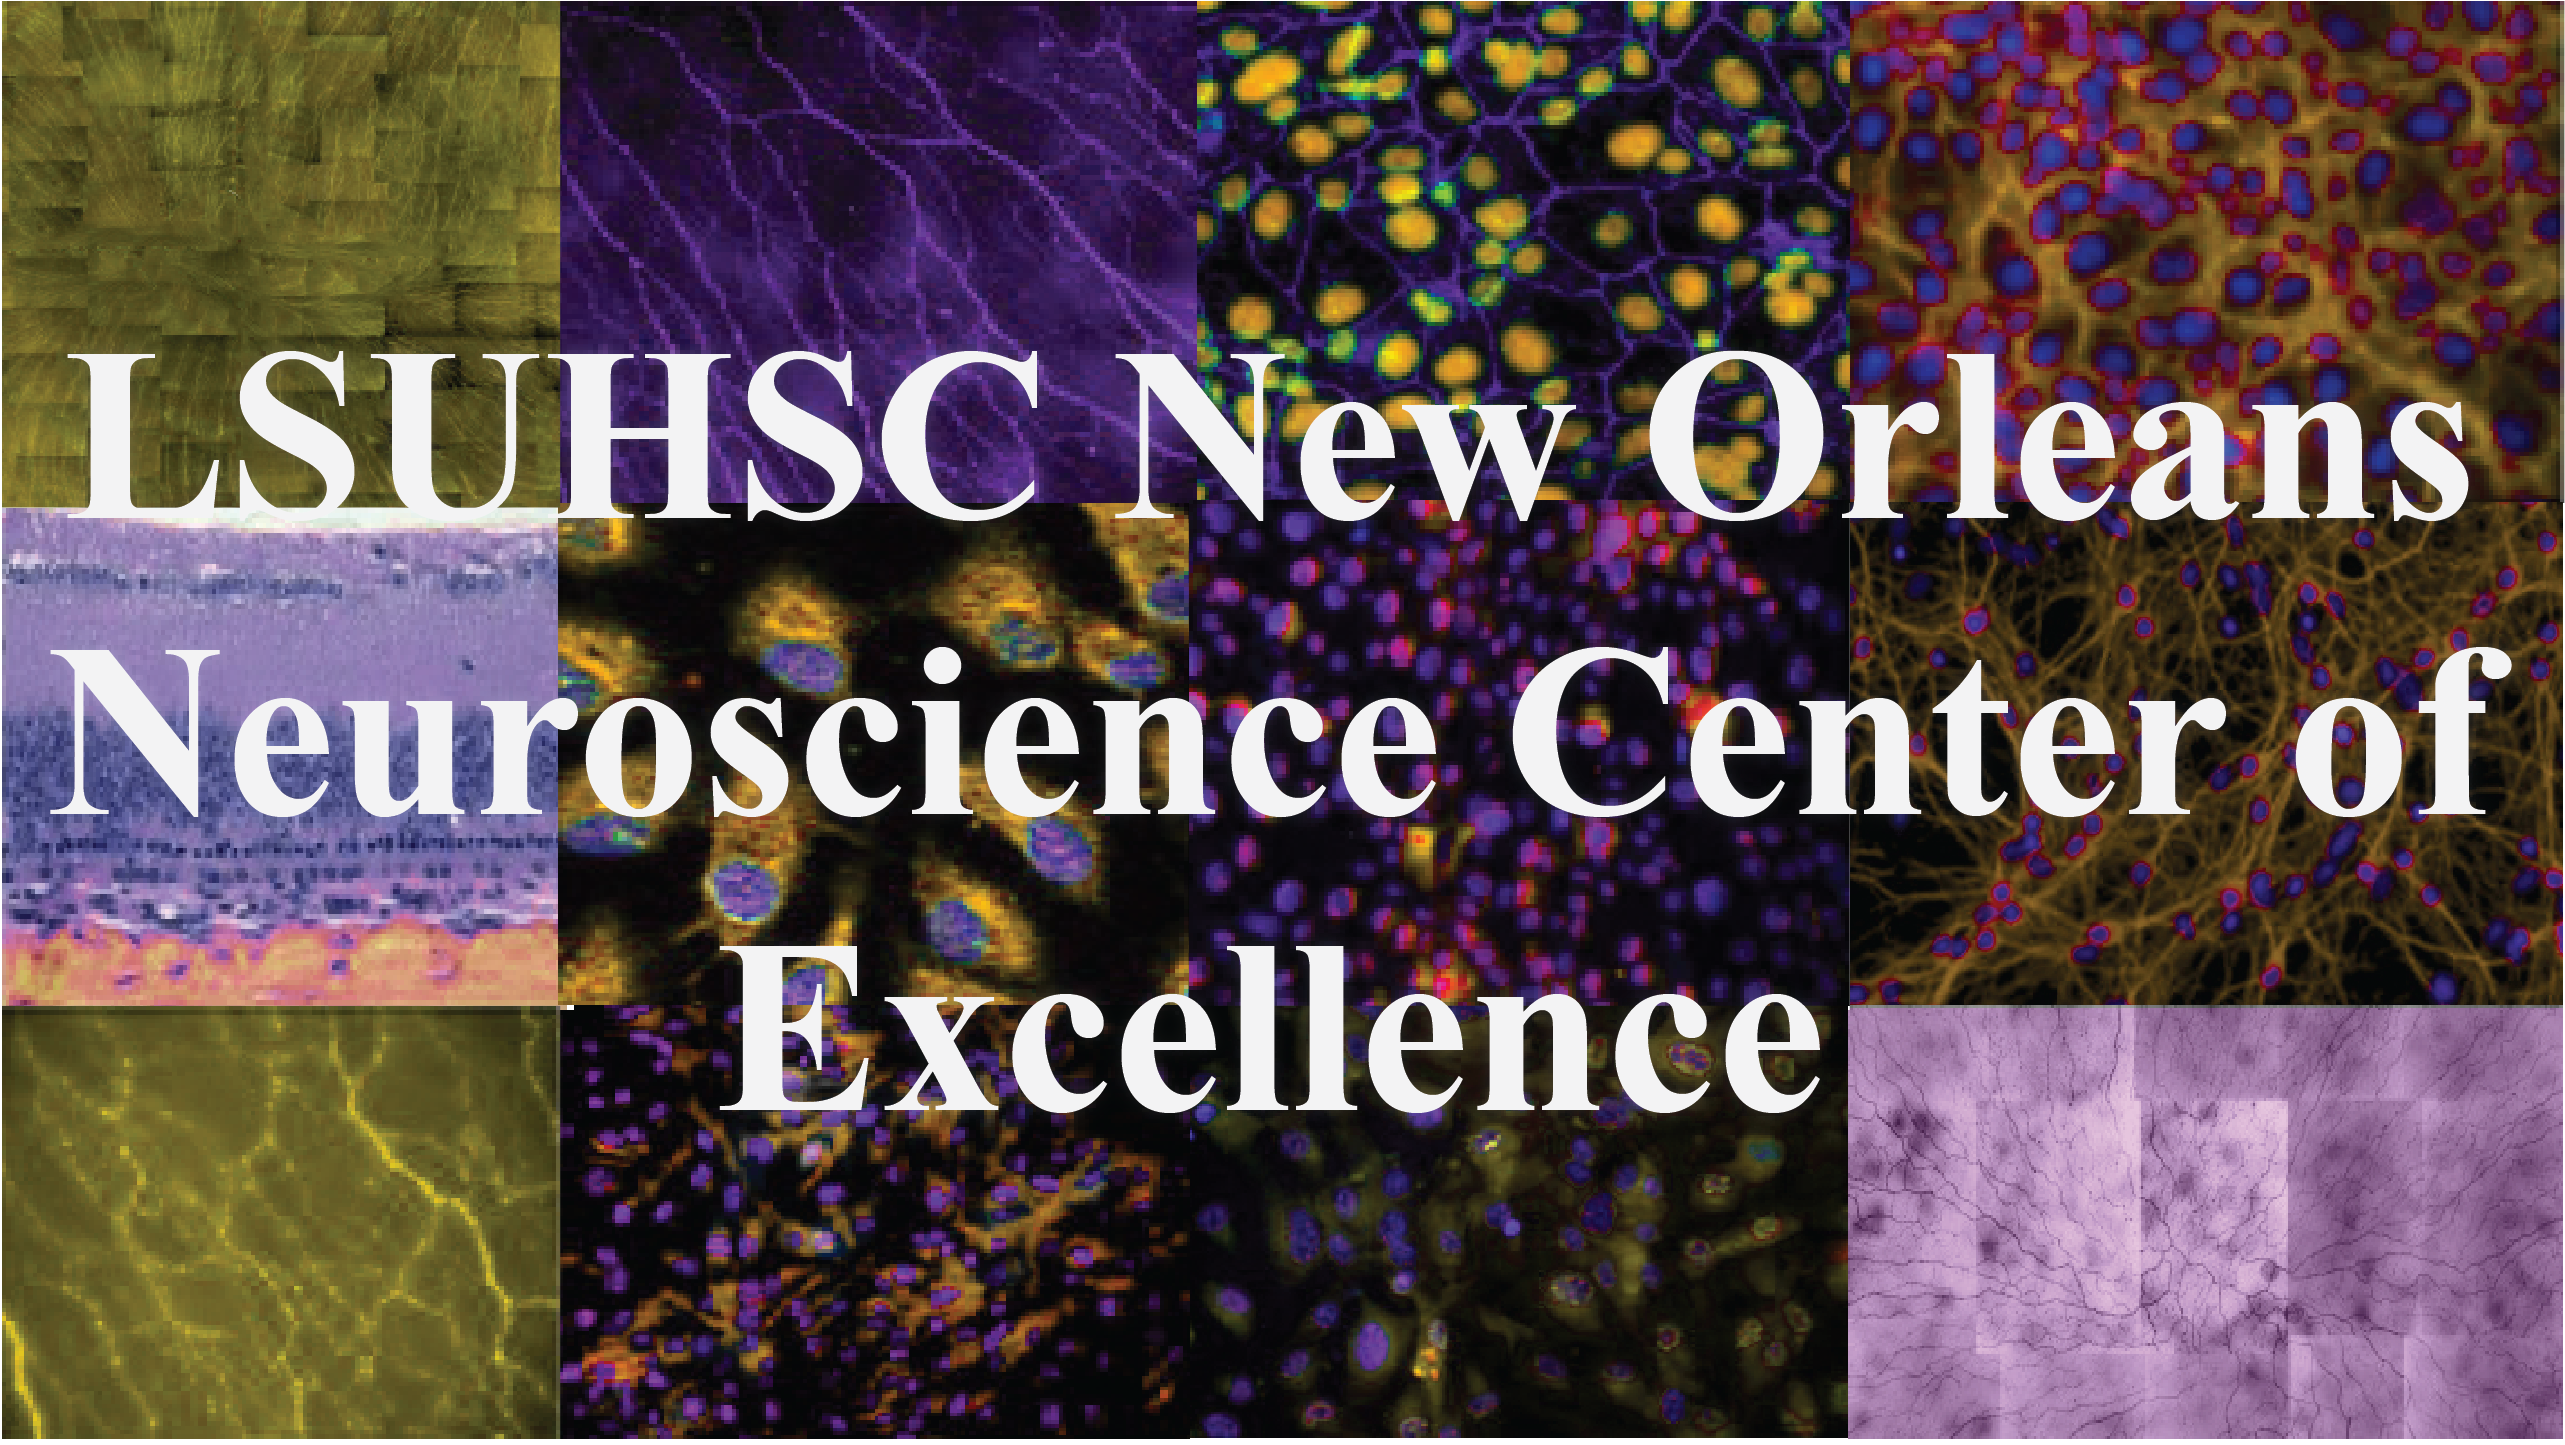 LSUHSC New Orleans Neuroscience Center of Excellence Sign